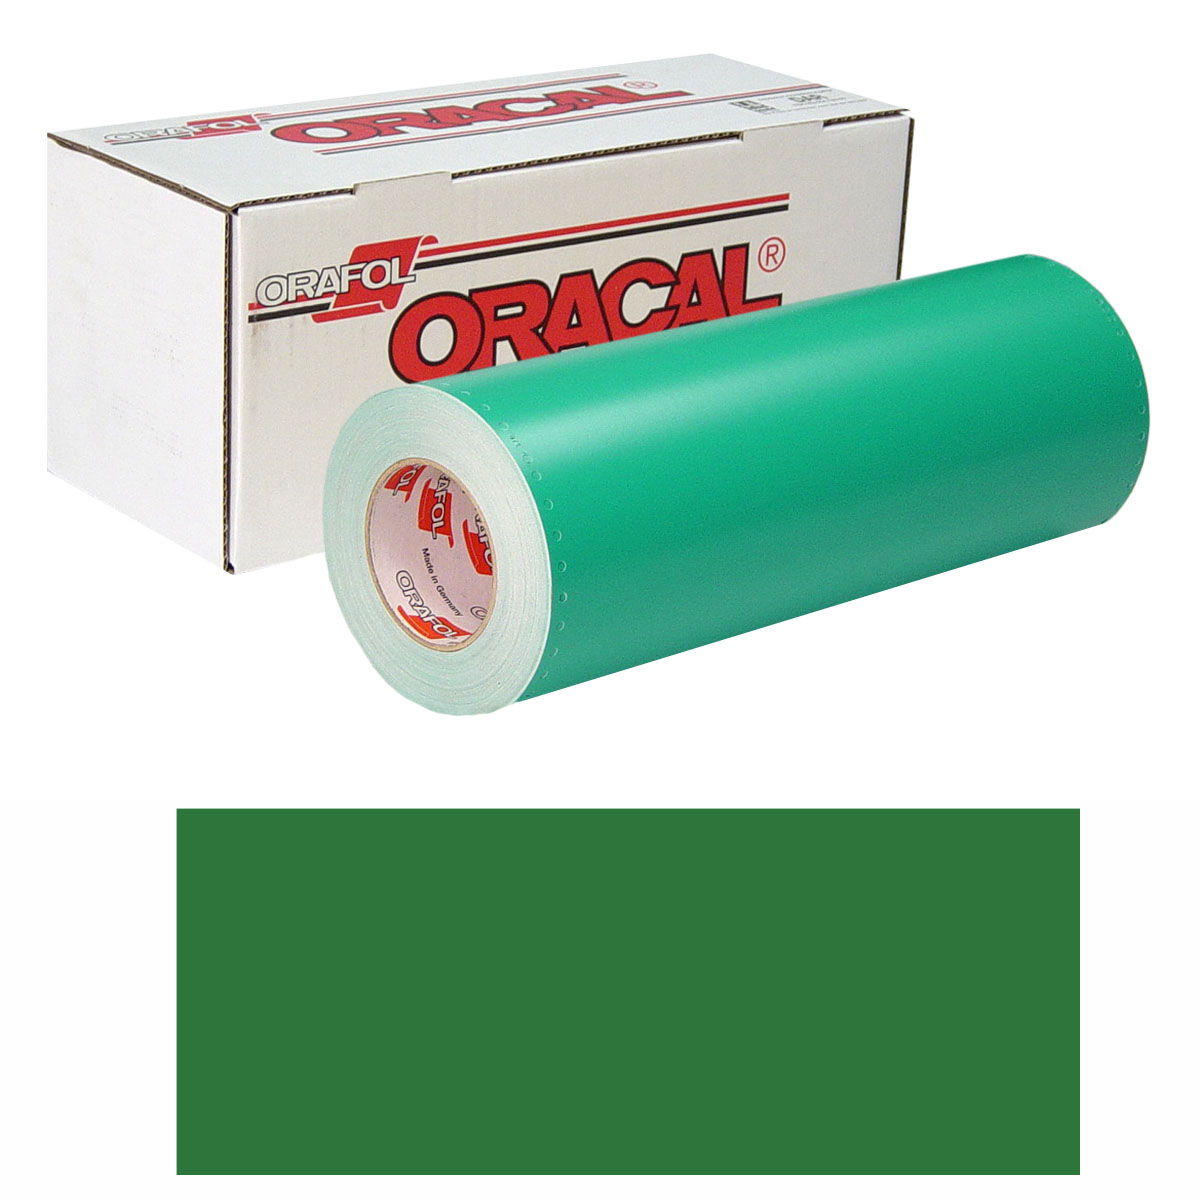 ORACAL 8500 30in X 10yd 614 Reed Green